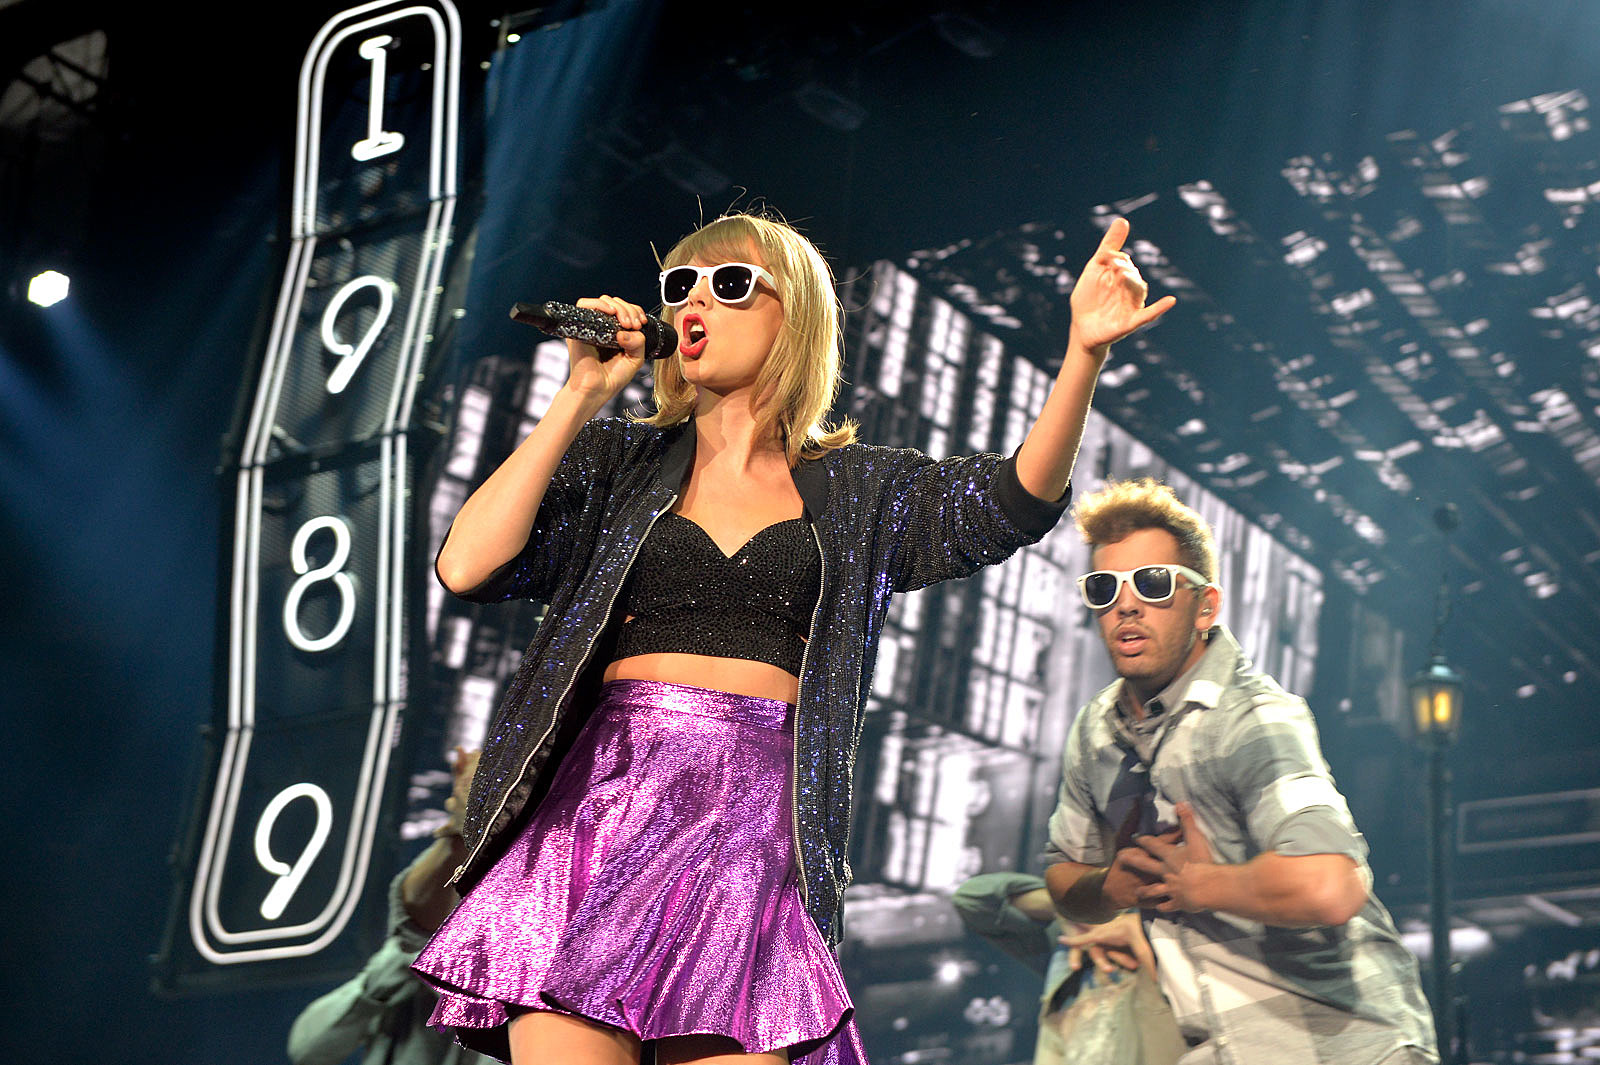 Taylor Swift 1989 quiz (37 trivia questions & answers)